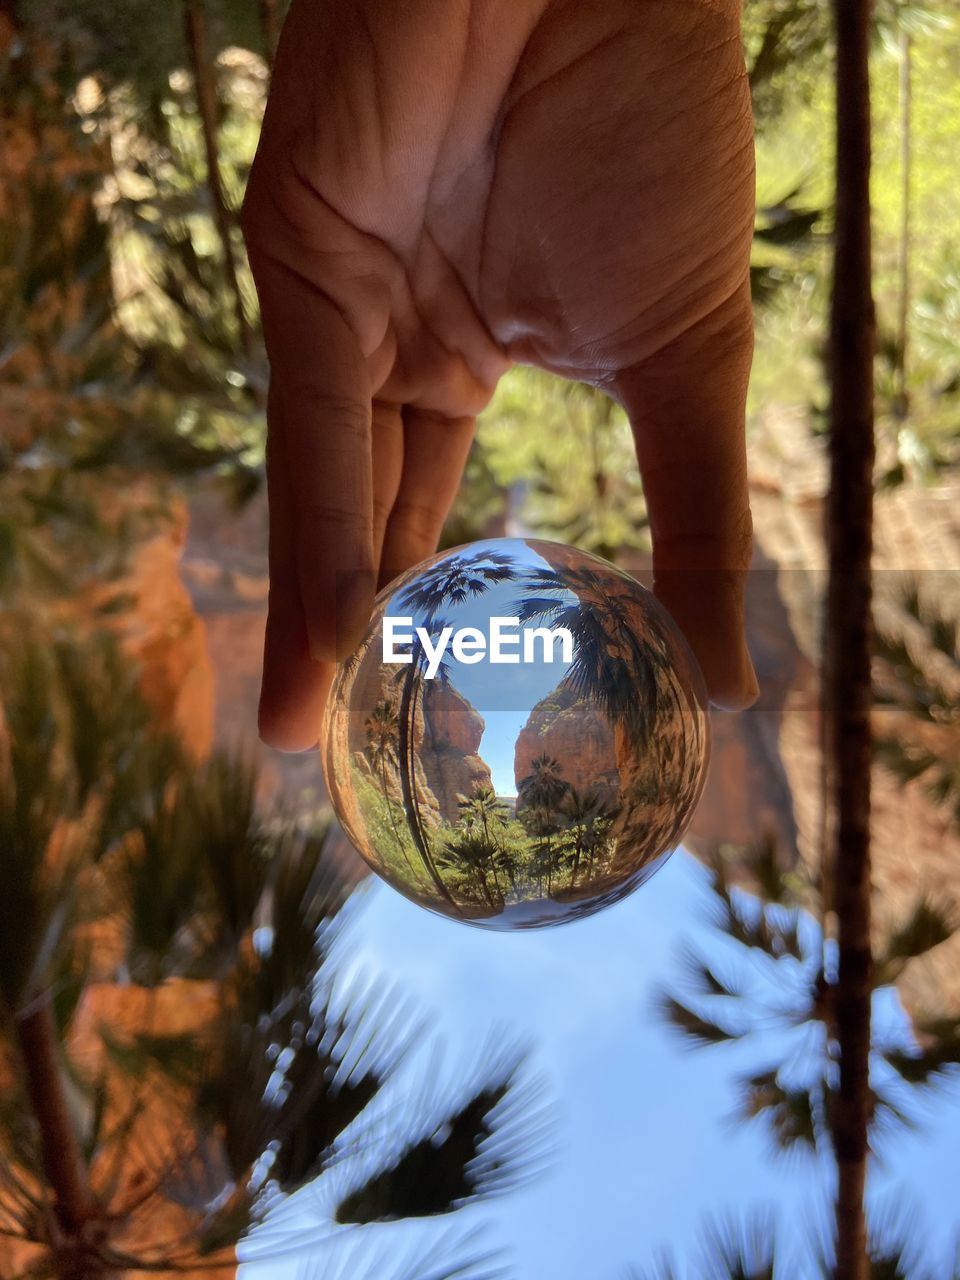 REFLECTION OF PERSON HAND HOLDING CRYSTAL BALL ON GLASS